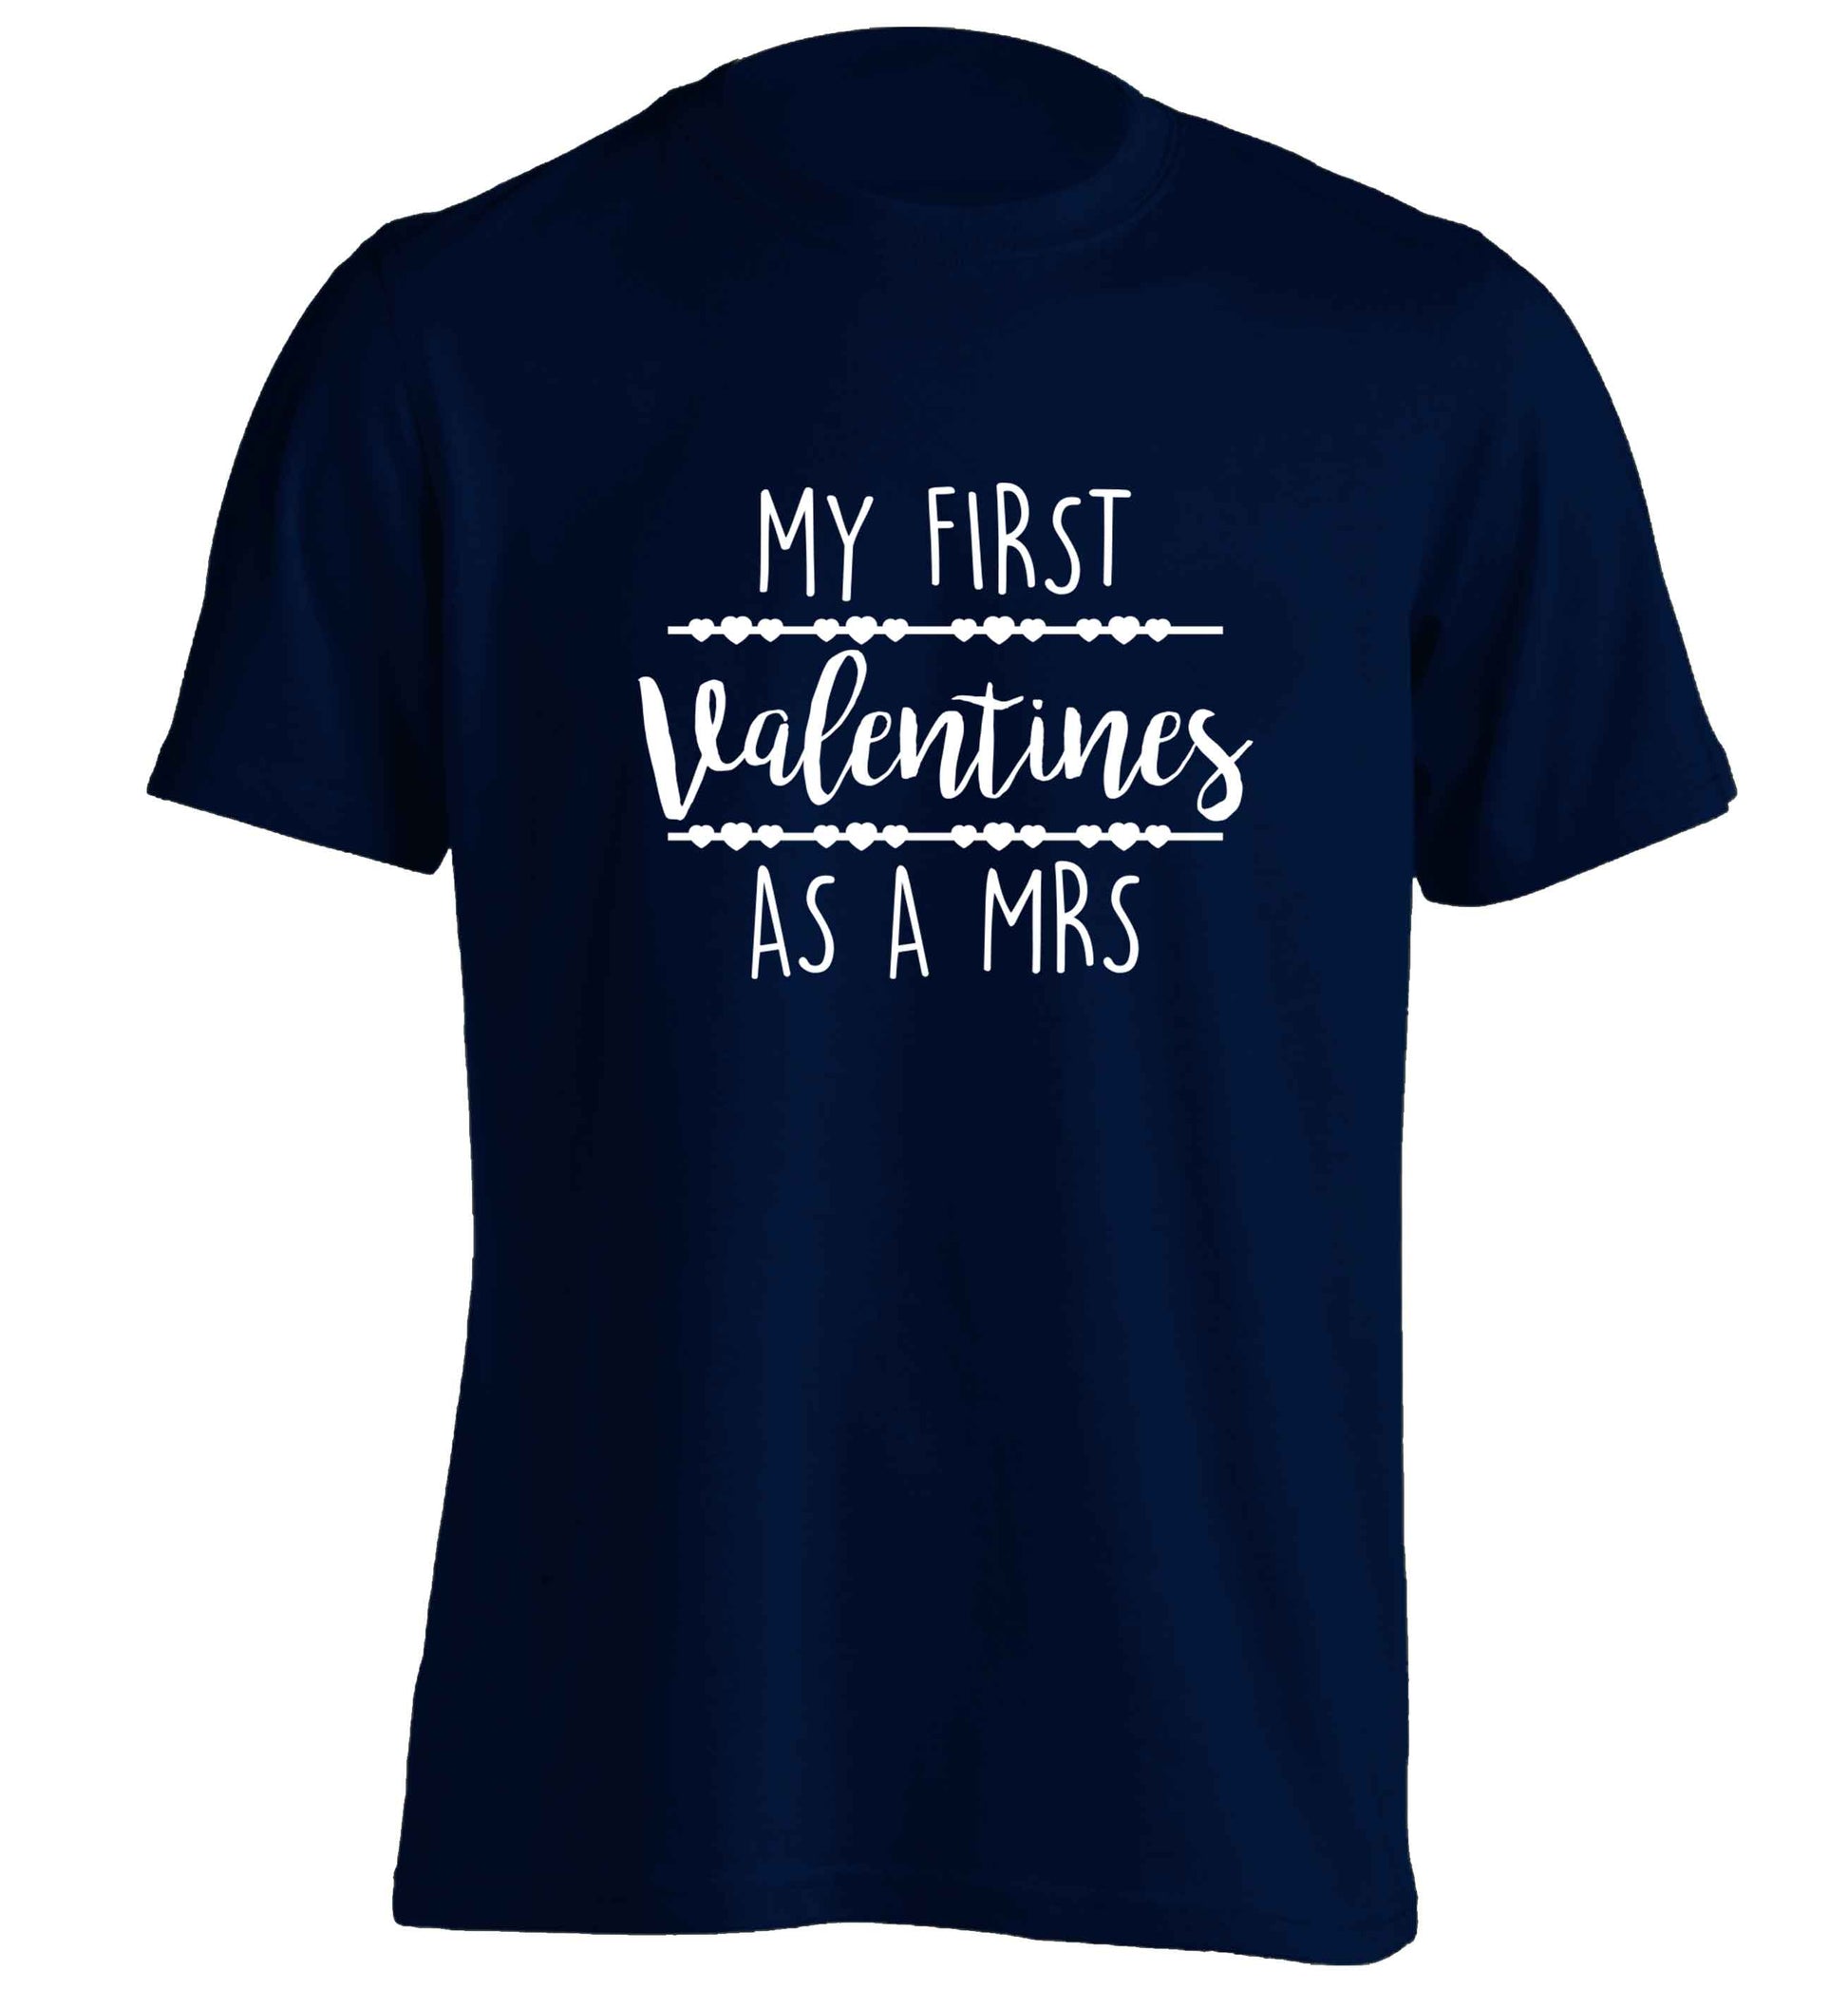 My first valentines as a Mrs adults unisex navy Tshirt 2XL